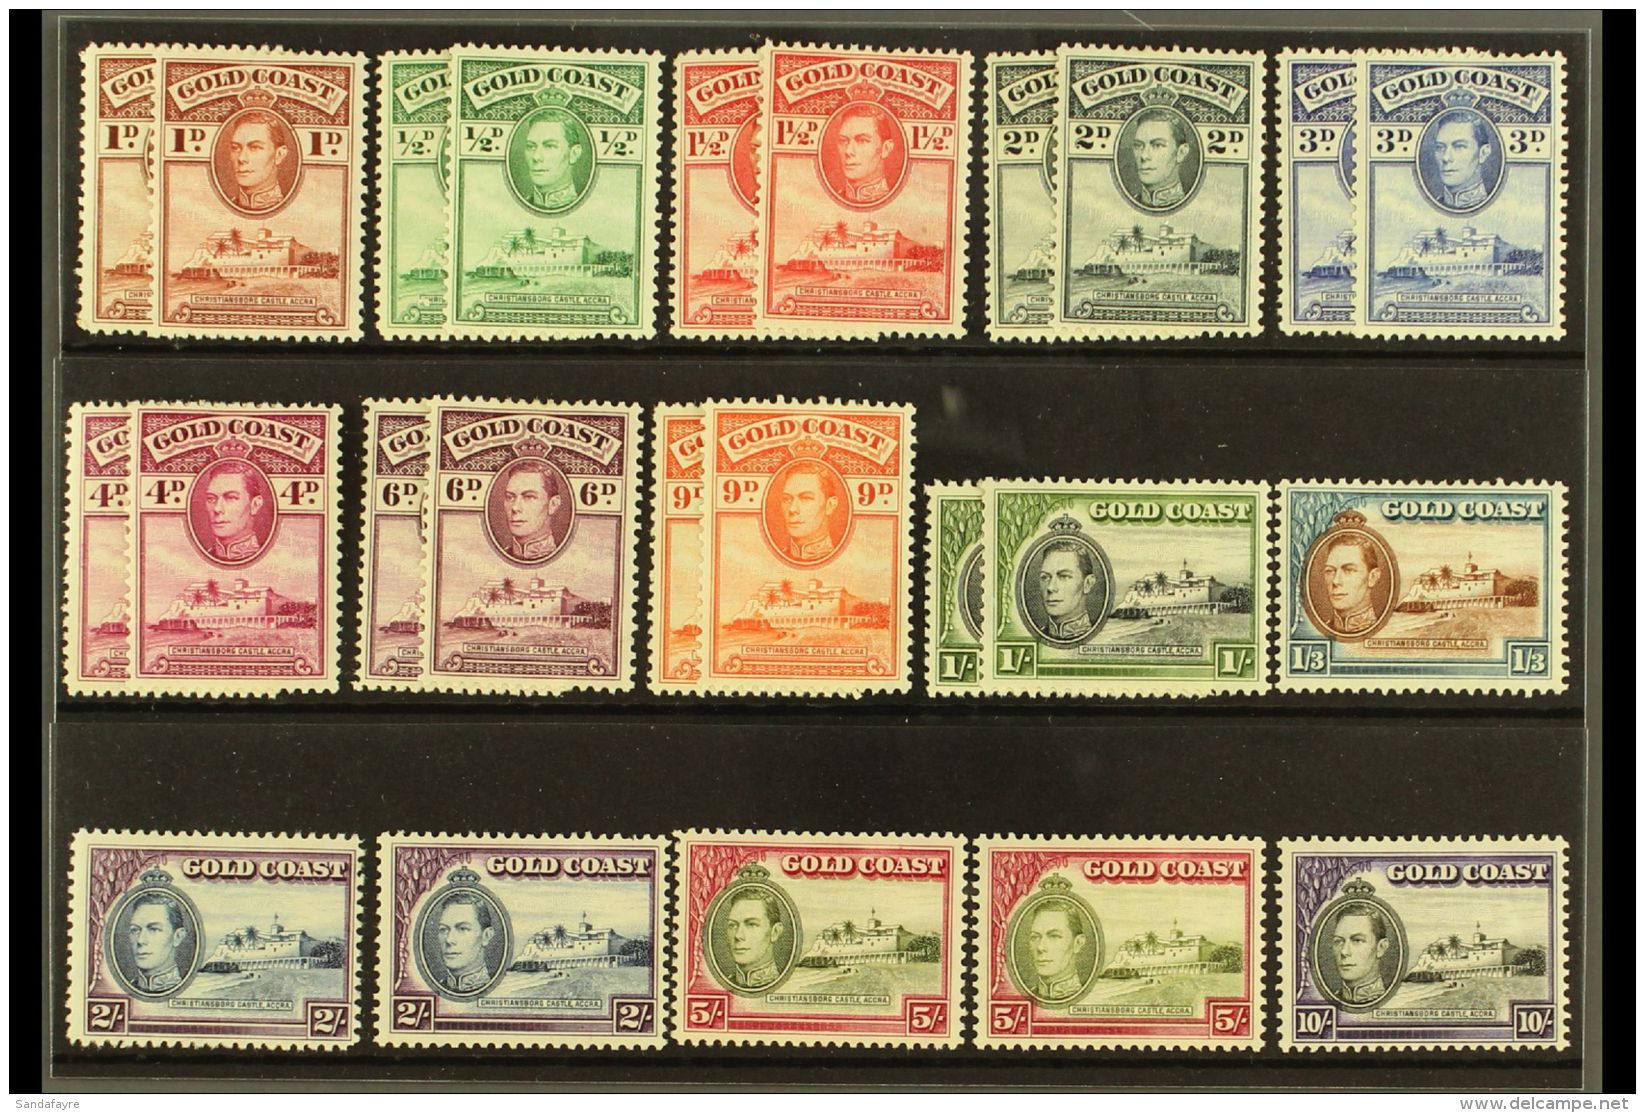 1938-43 Pictorials Complete Set With ALL PERFORATION TYPES, SG 120/32 &amp; 120a/31a, Superb Mint, Very Fresh. (24... - Gold Coast (...-1957)